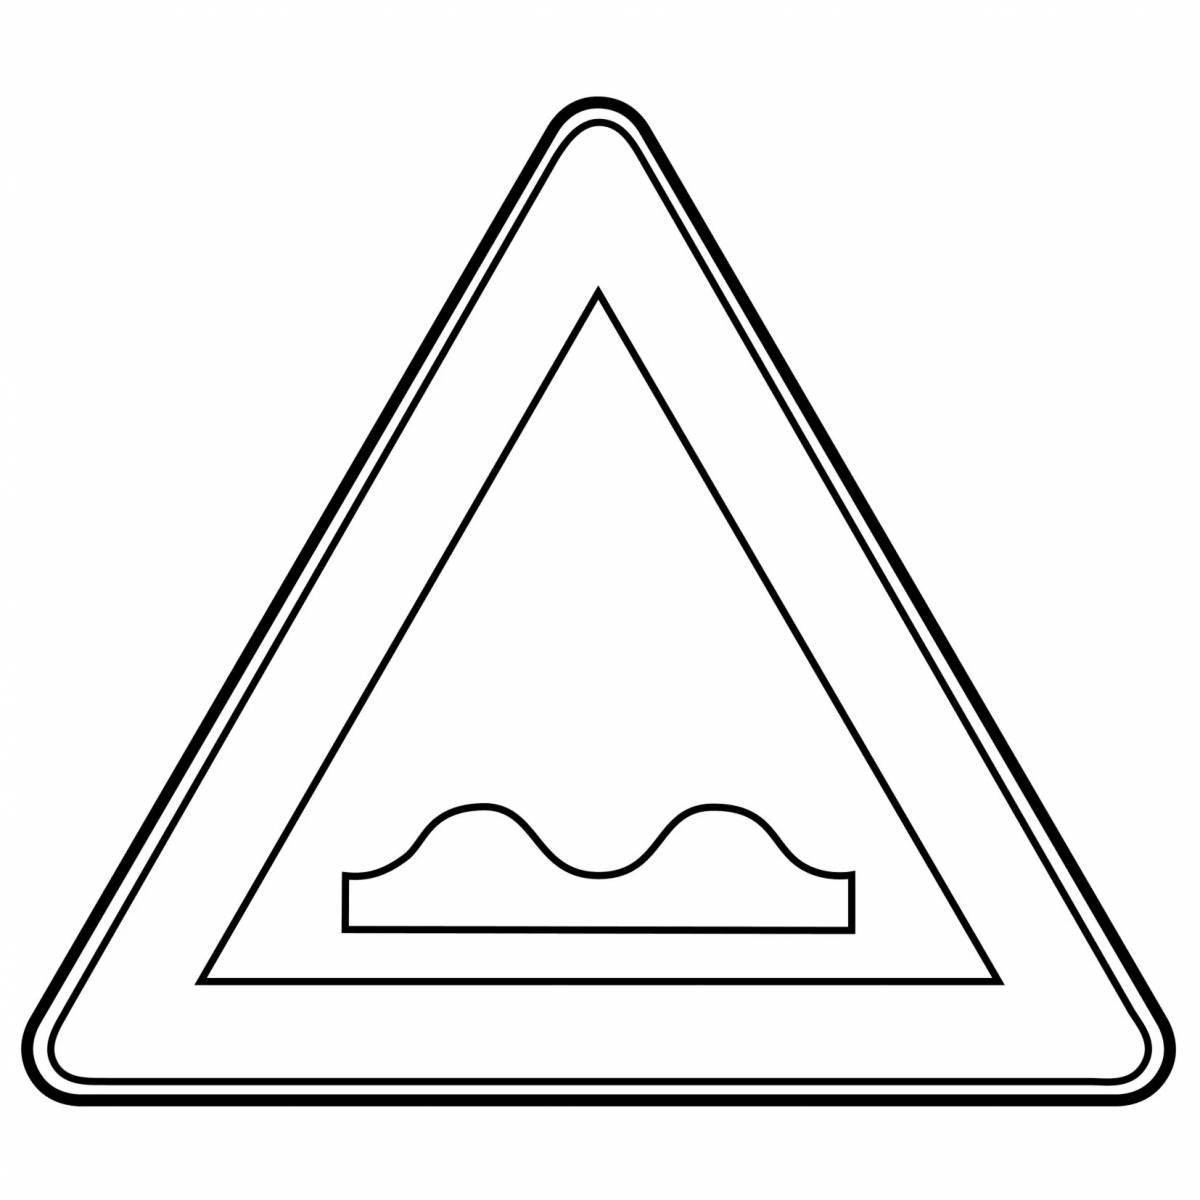 Adorable road warning signs coloring page